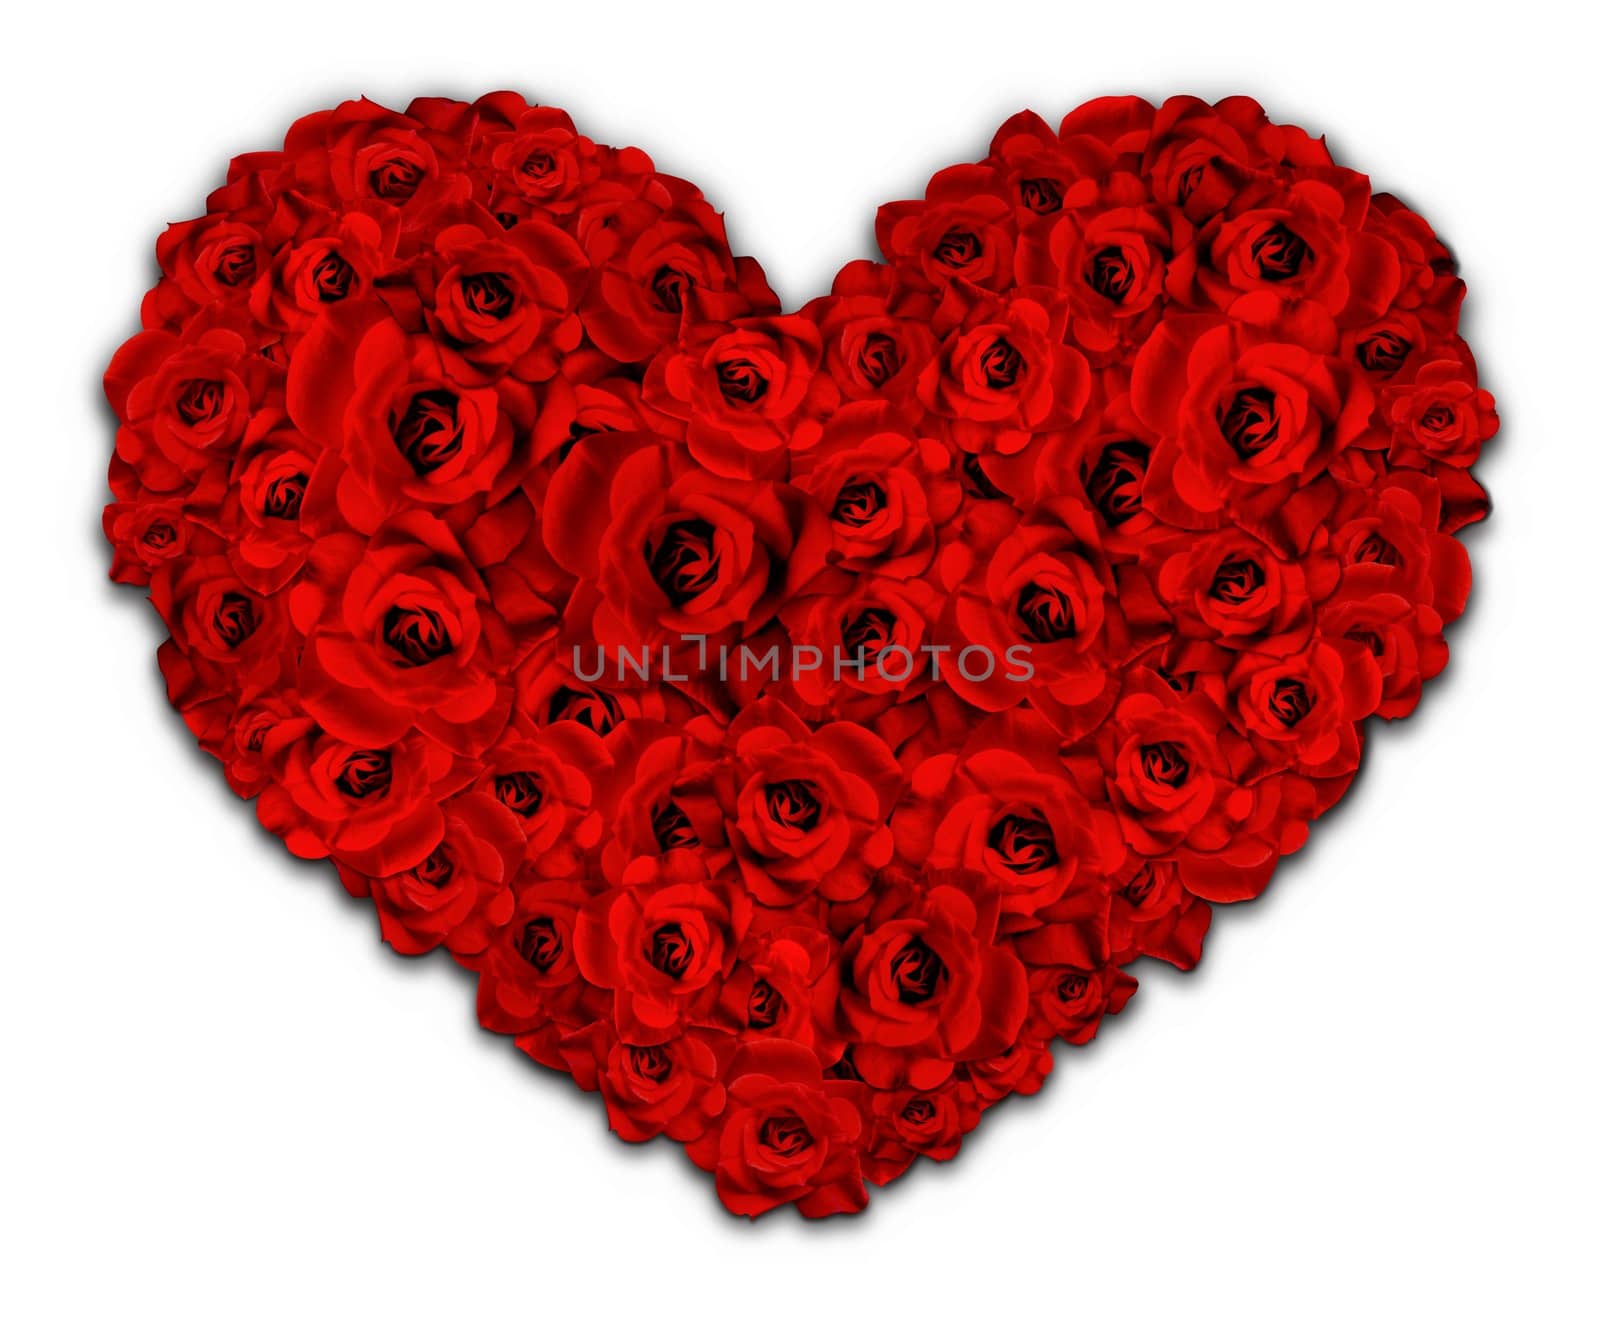 Illustrated Heart shape made of red flowers